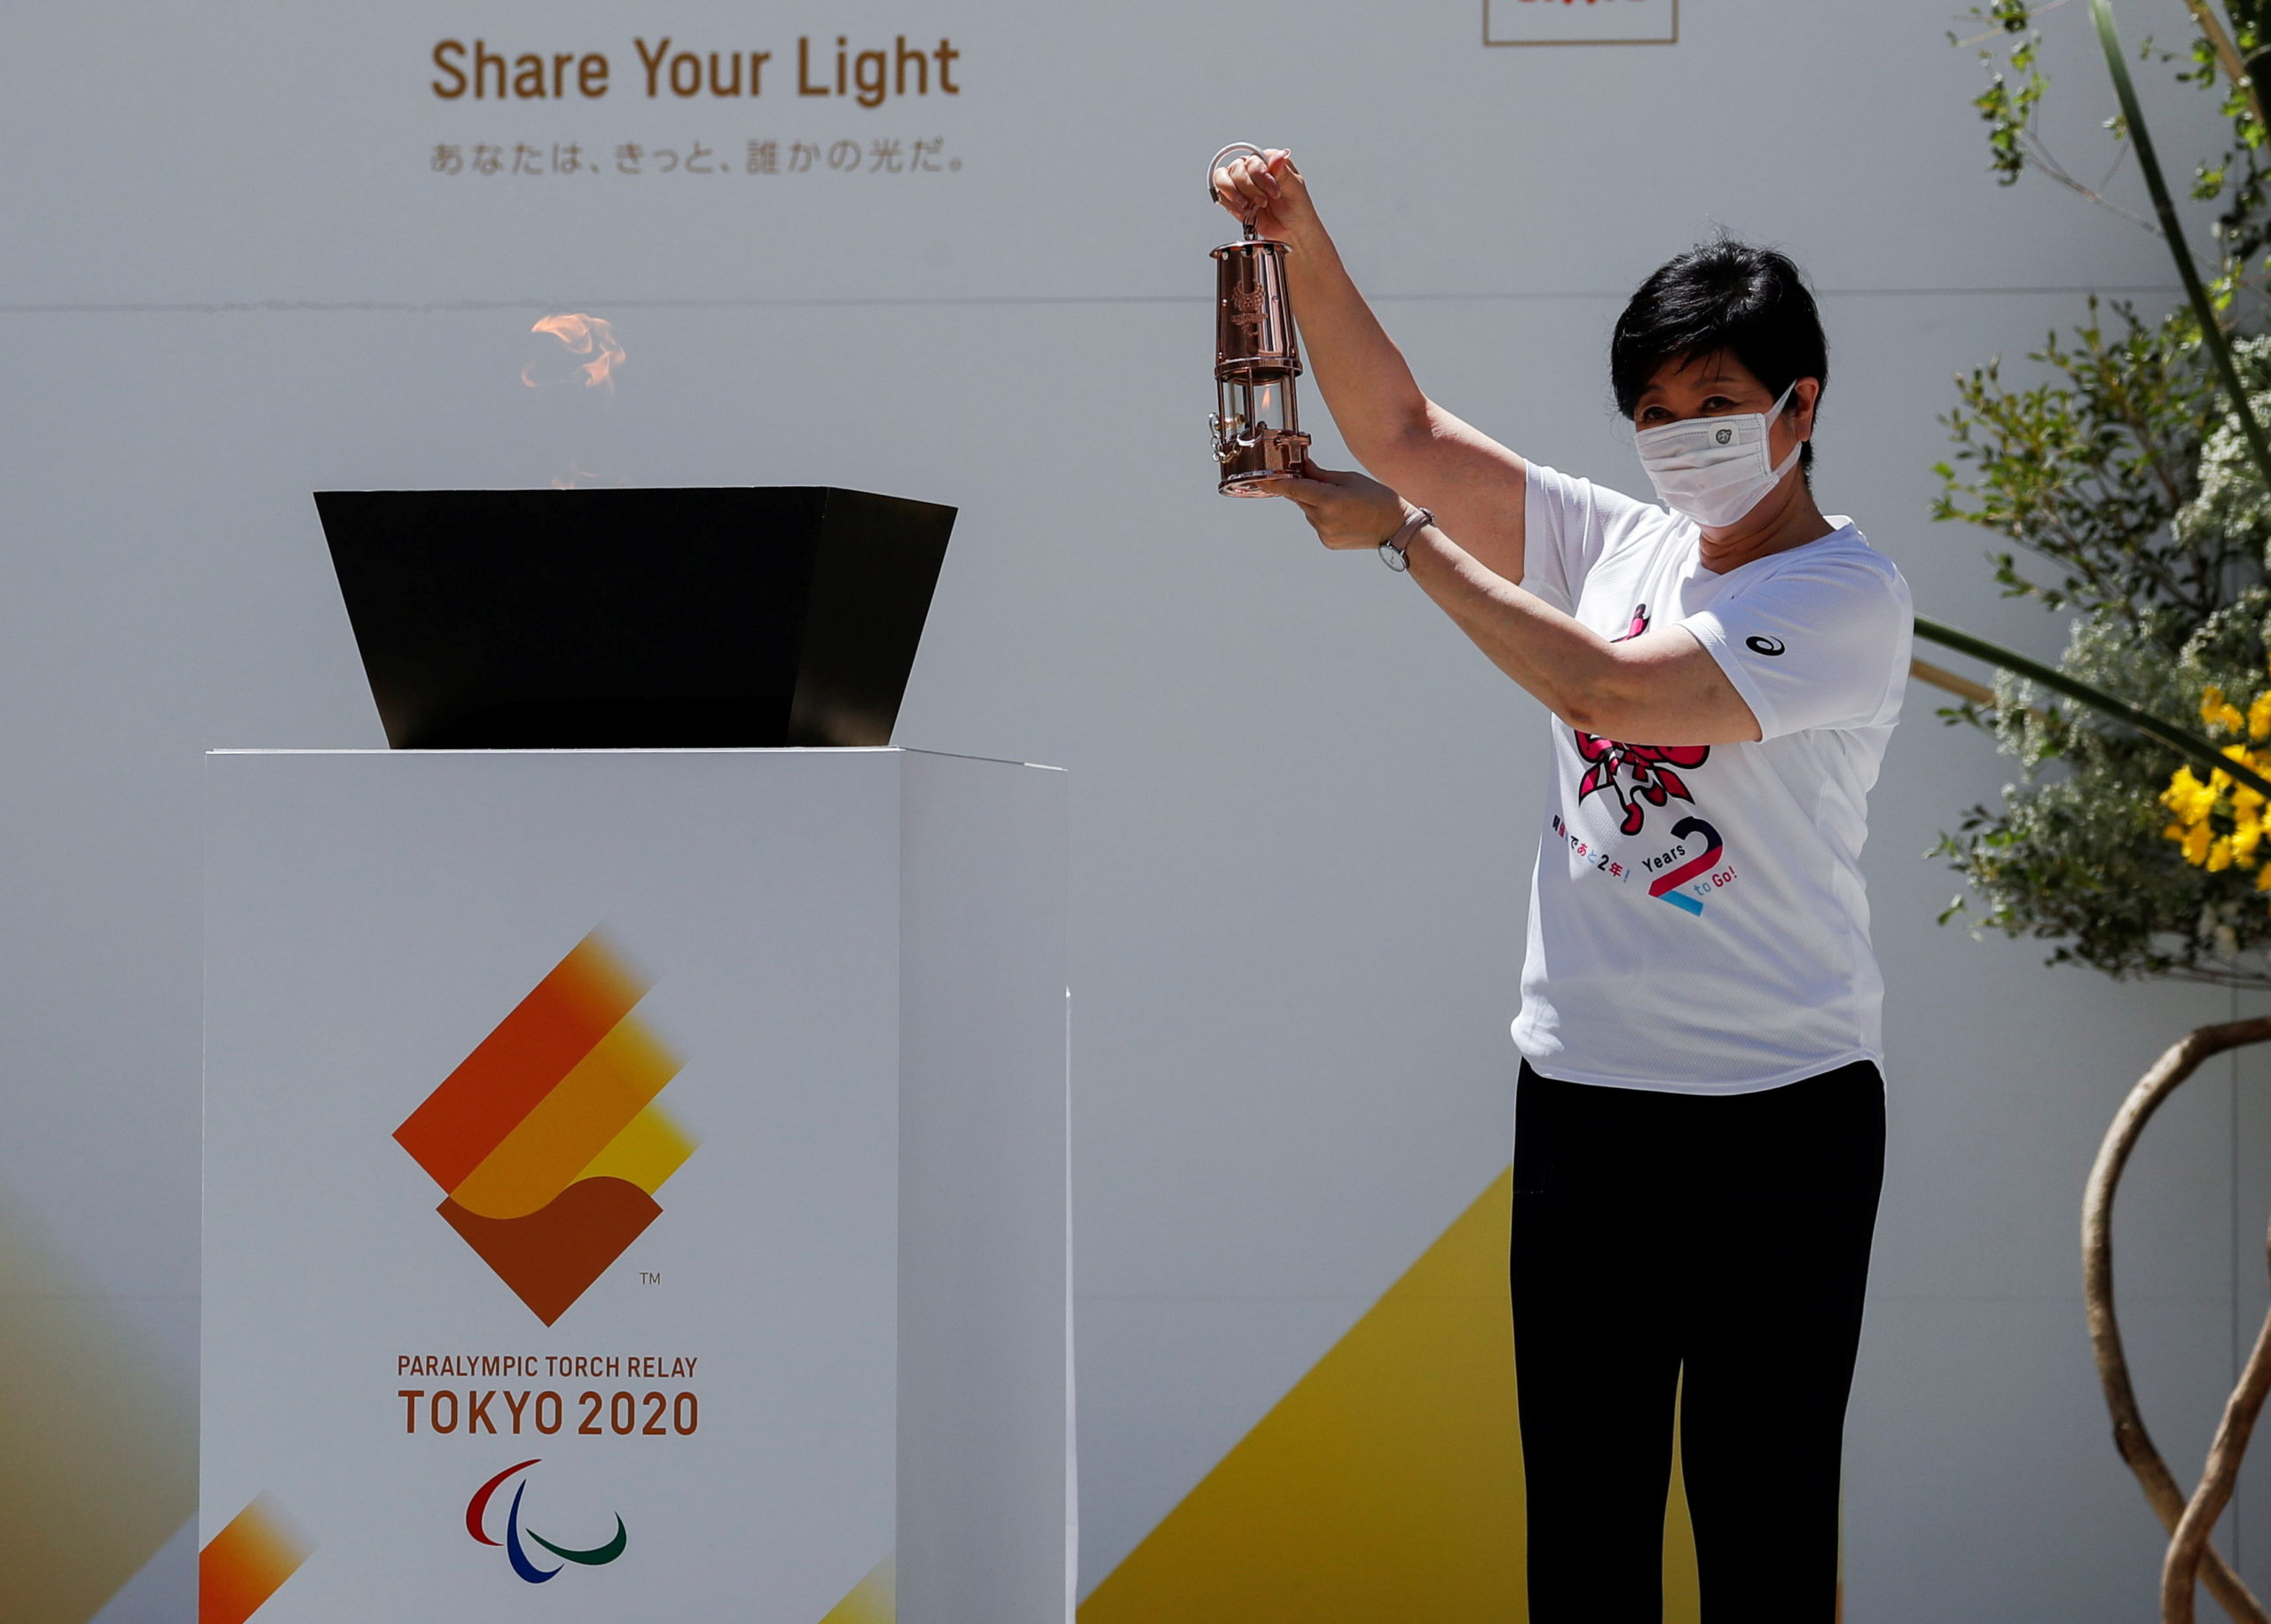 Tokyo Governor Yuriko Koike holds the Paralympic torch lantern during the flame gathering event to merge flames collected from 62 municipalities within the Japanese capital into one, in Tokyo, Japan, August 20, 2021.